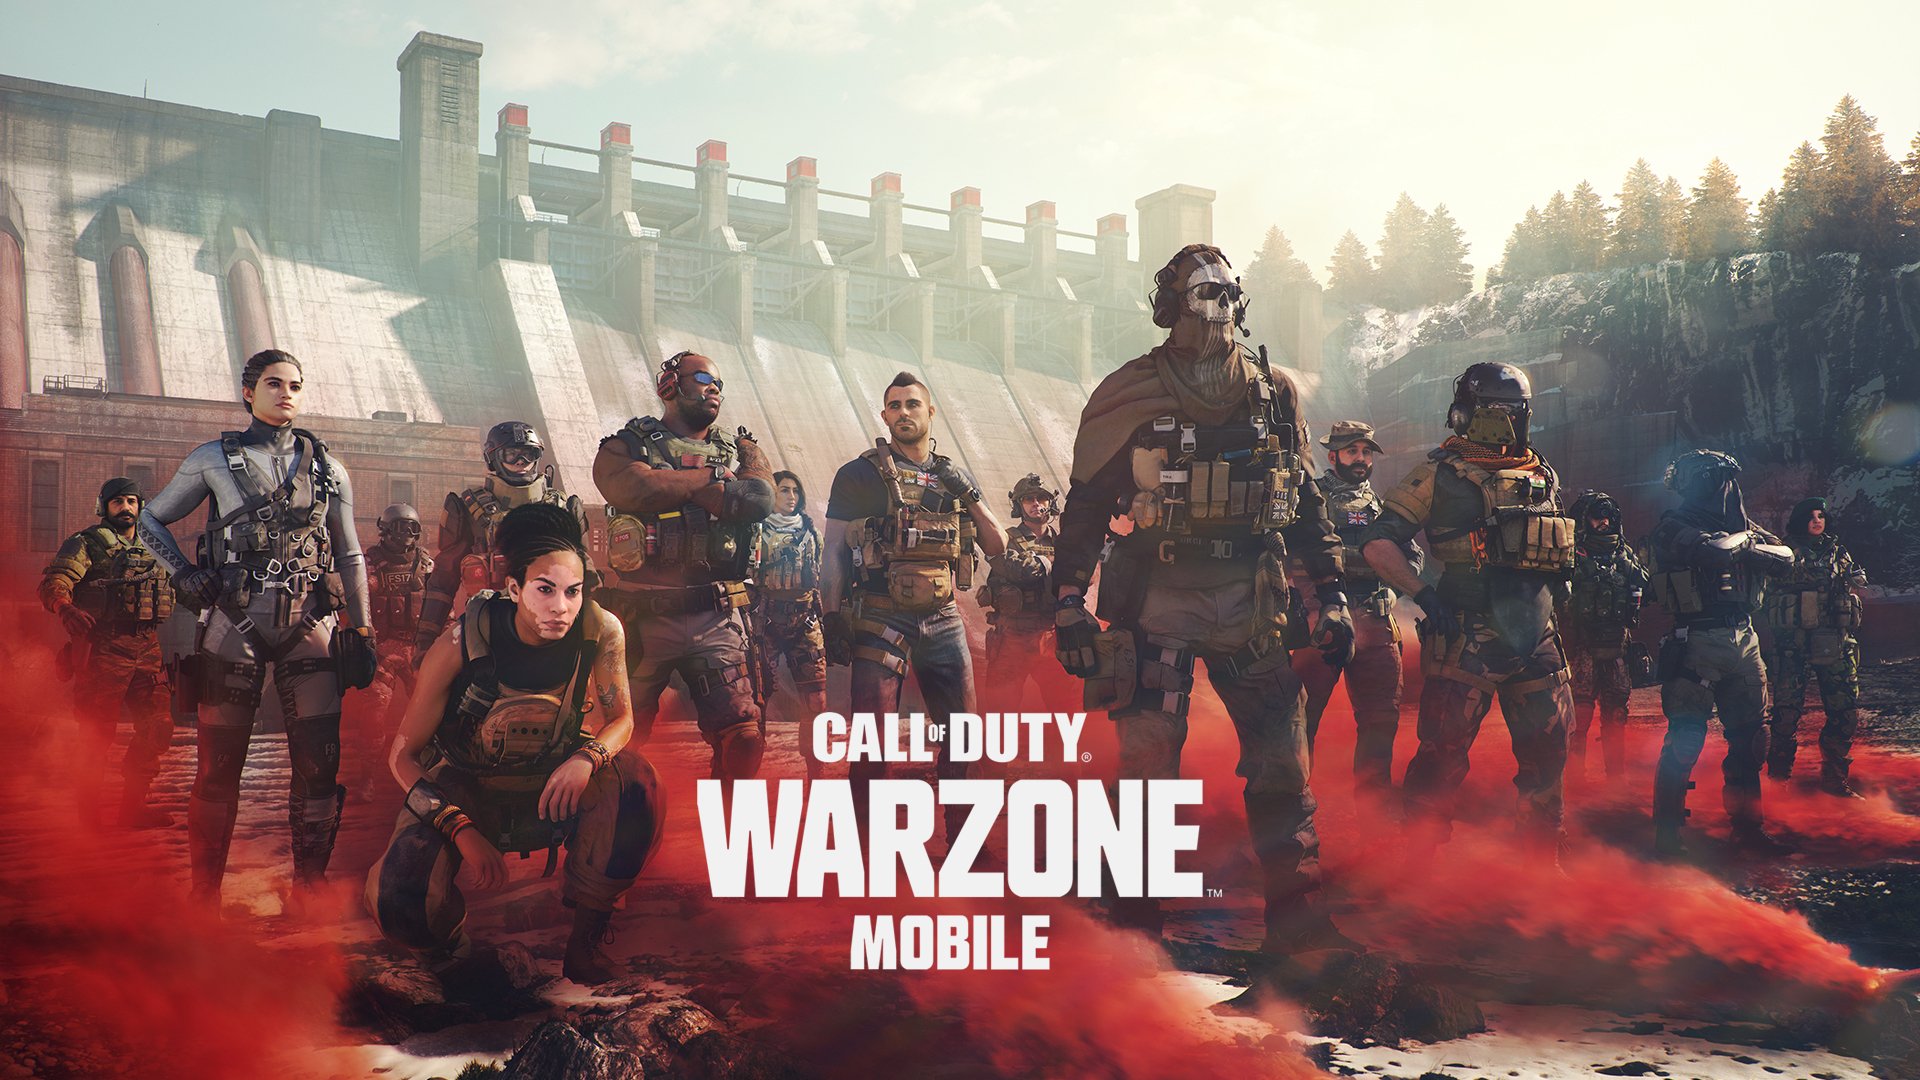 Warzone Mobile News